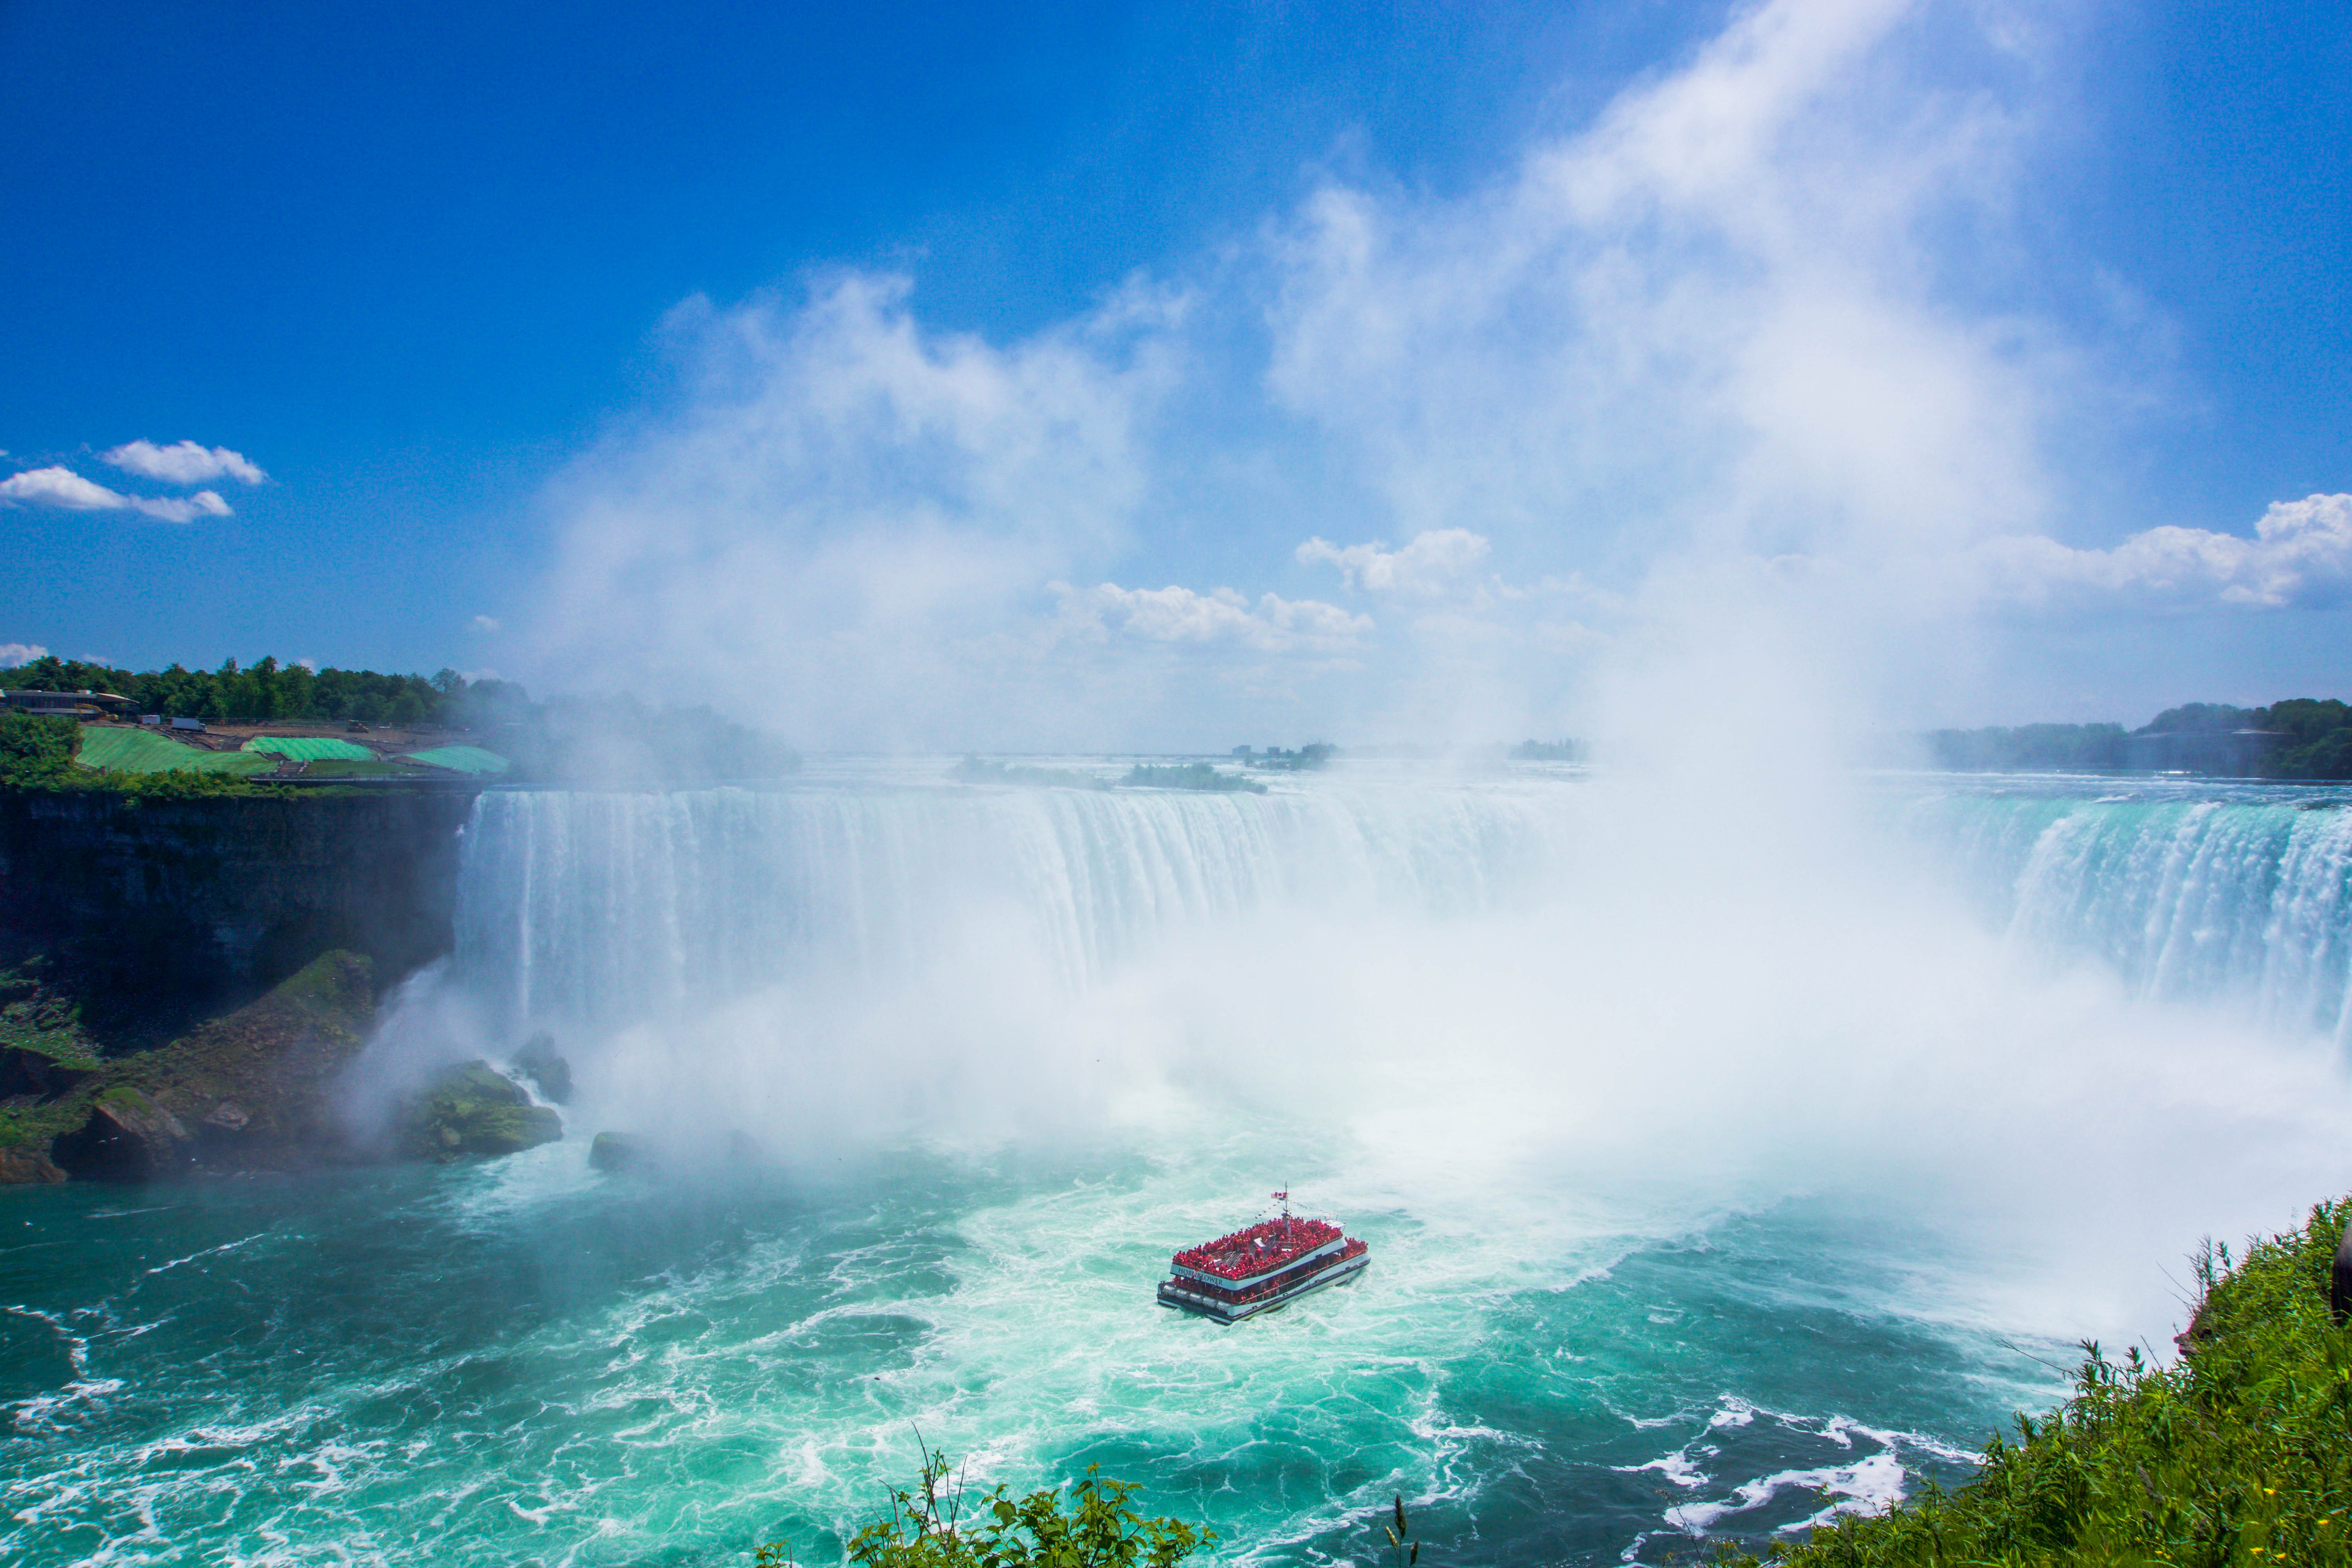 Cruise into the falls form the Canadian side